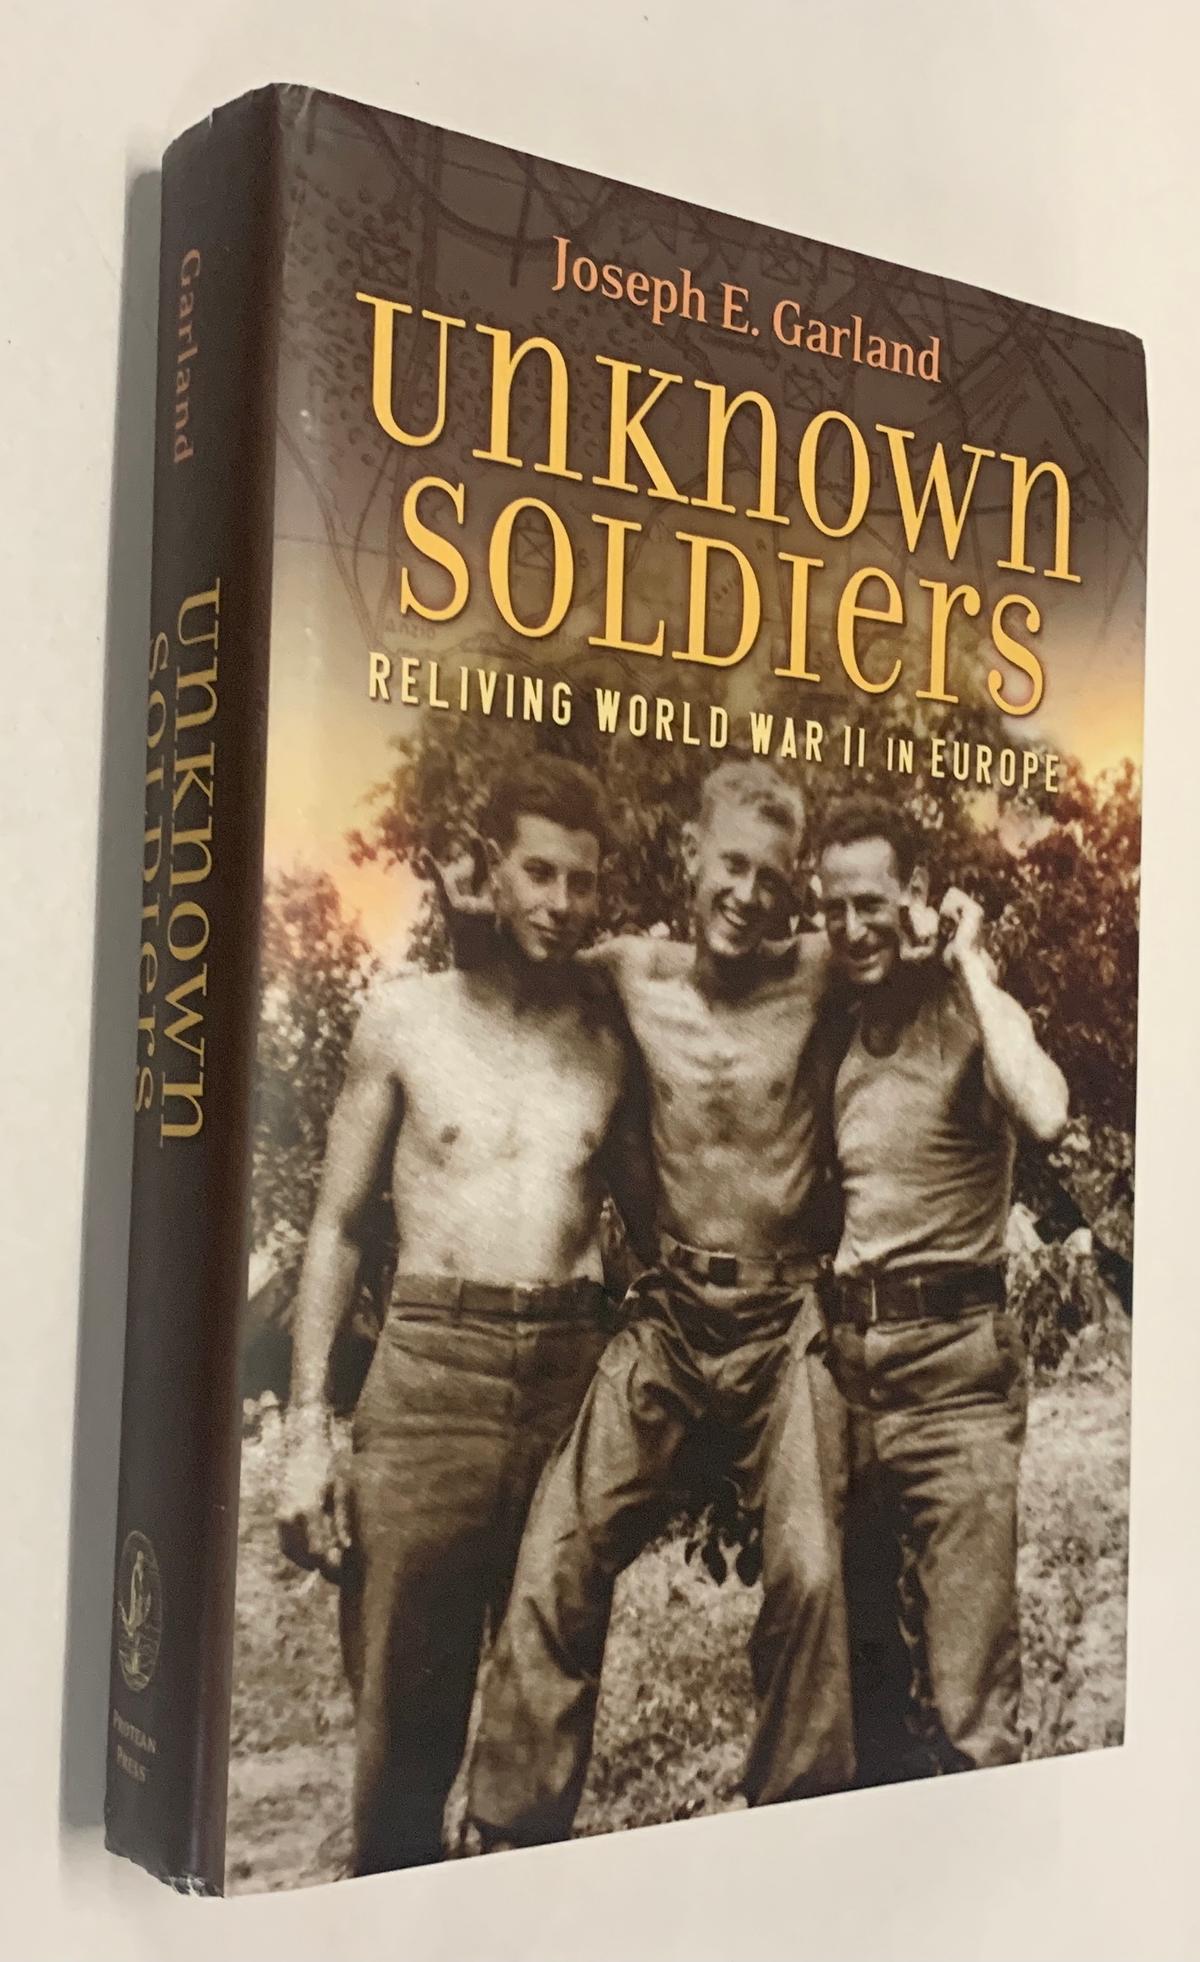 SIGNED Unknown Soldiers: Reliving World War II in Europe